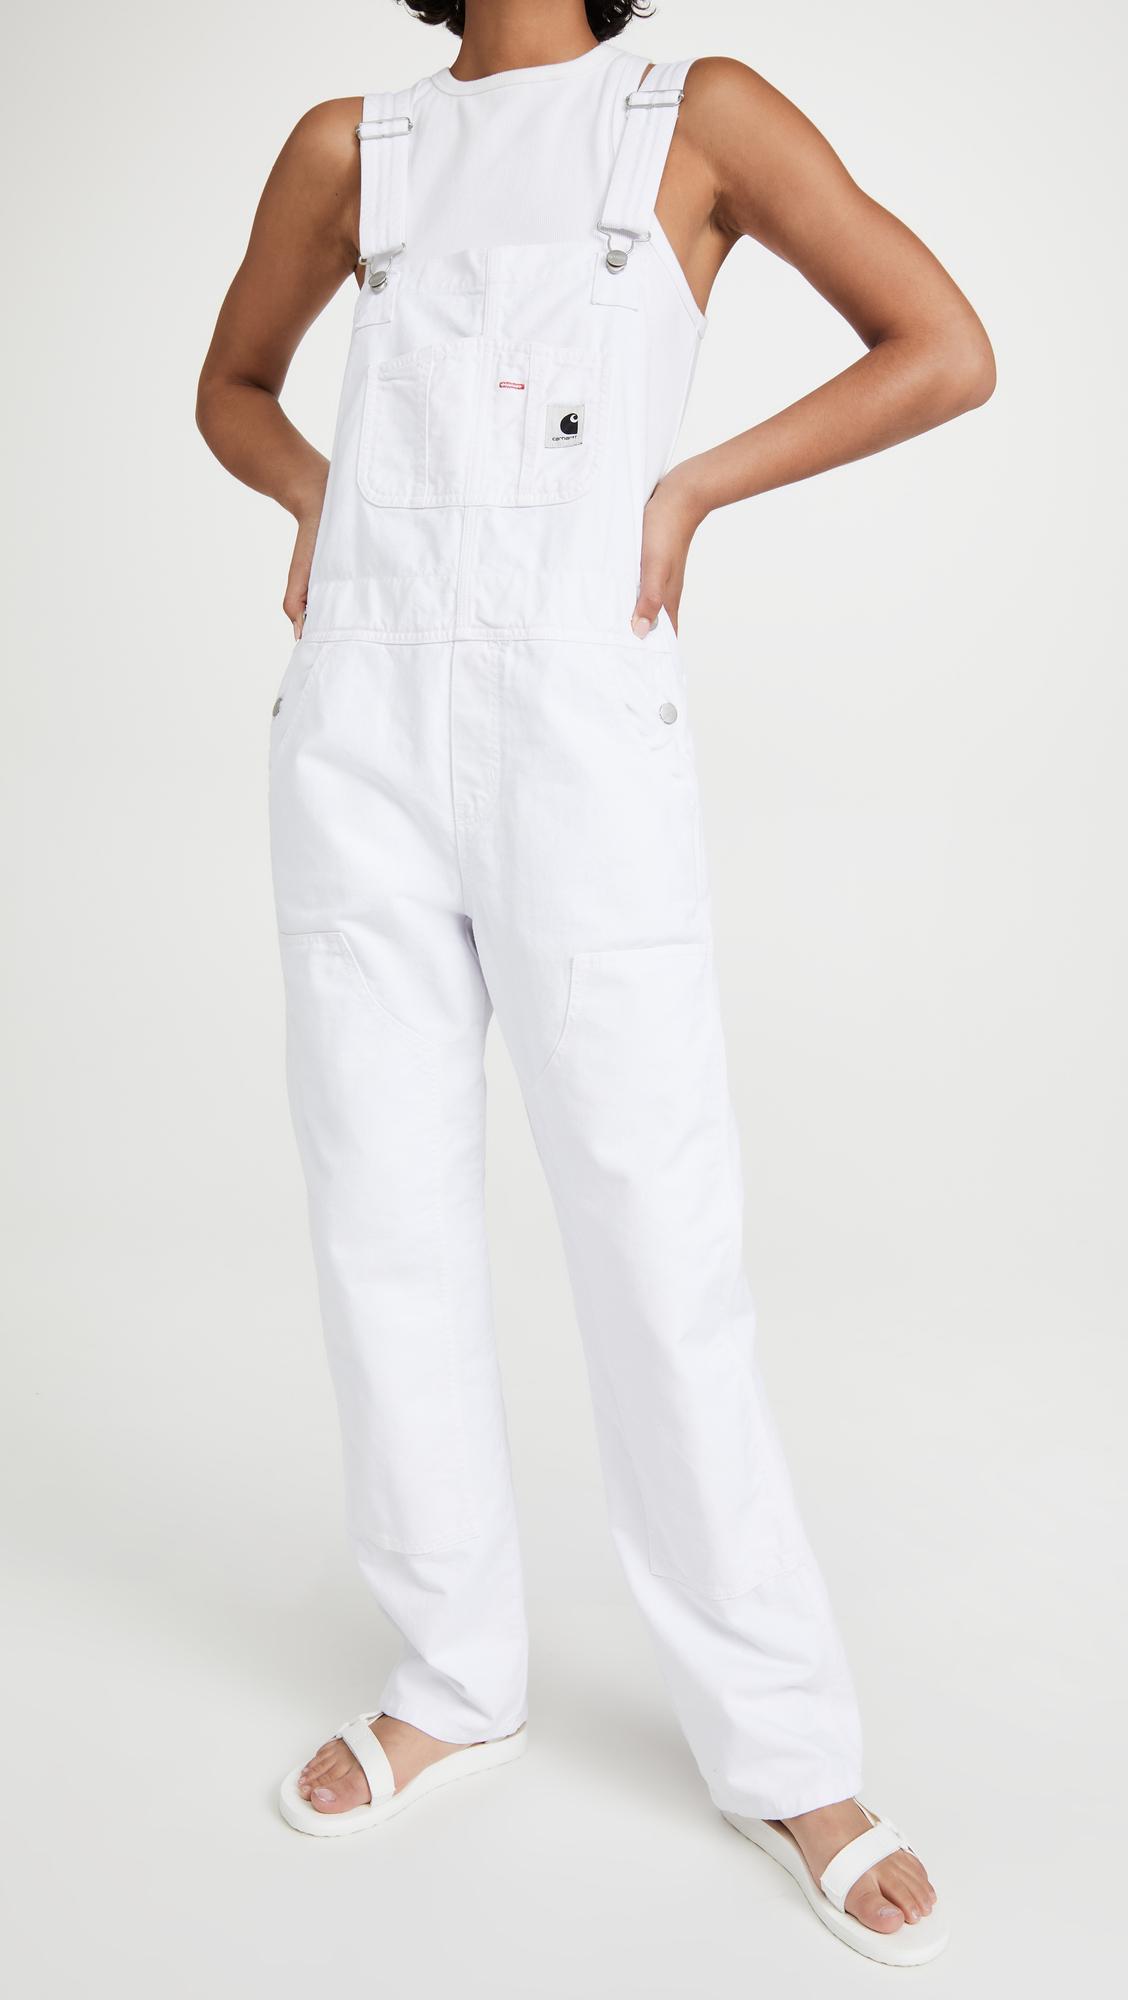 Carhartt WIP Sonora Overalls in White | Lyst